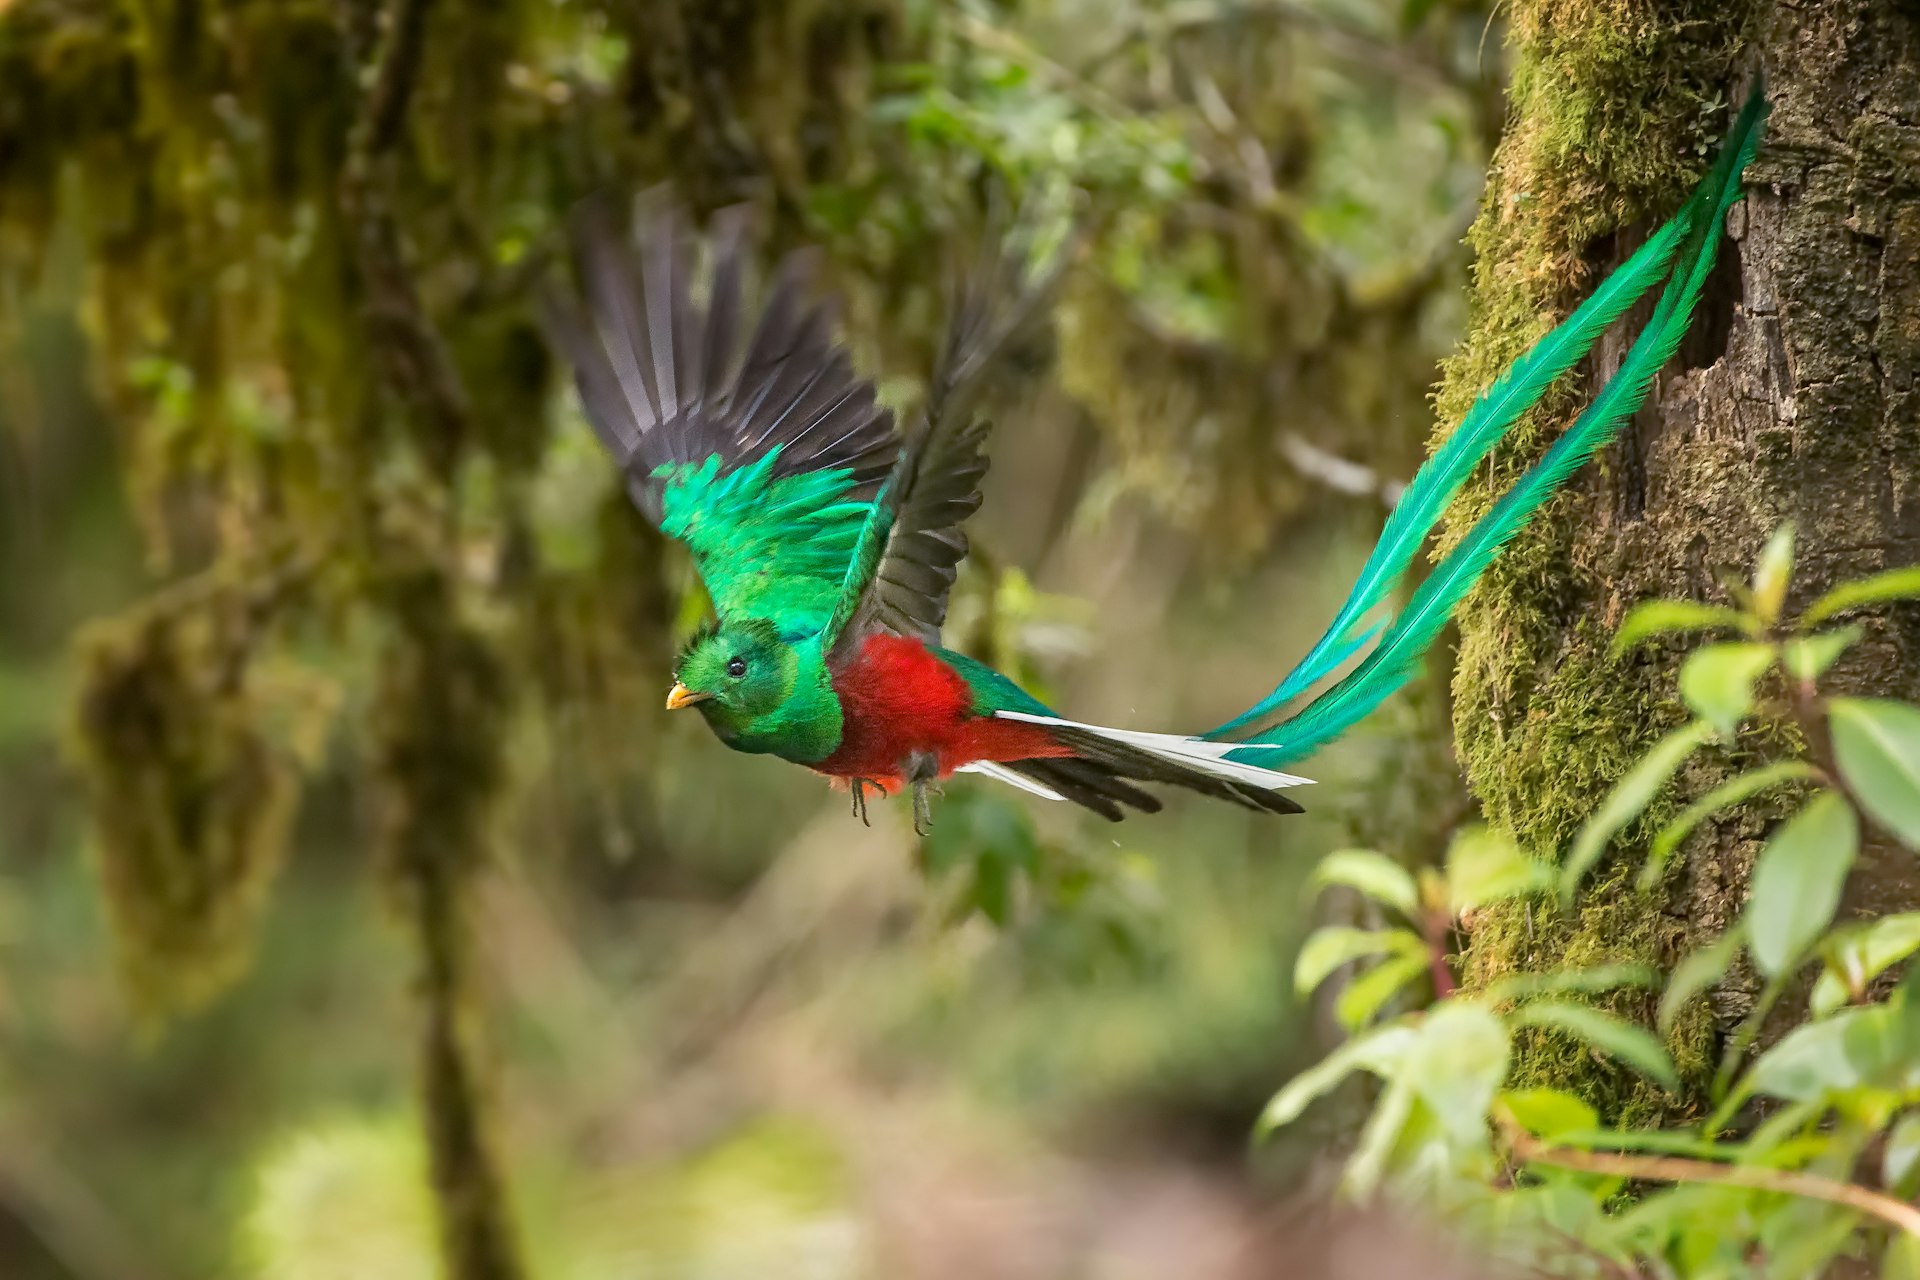 A turquoise and scarlet resplendent quetzal soaring through the trees with wings spread